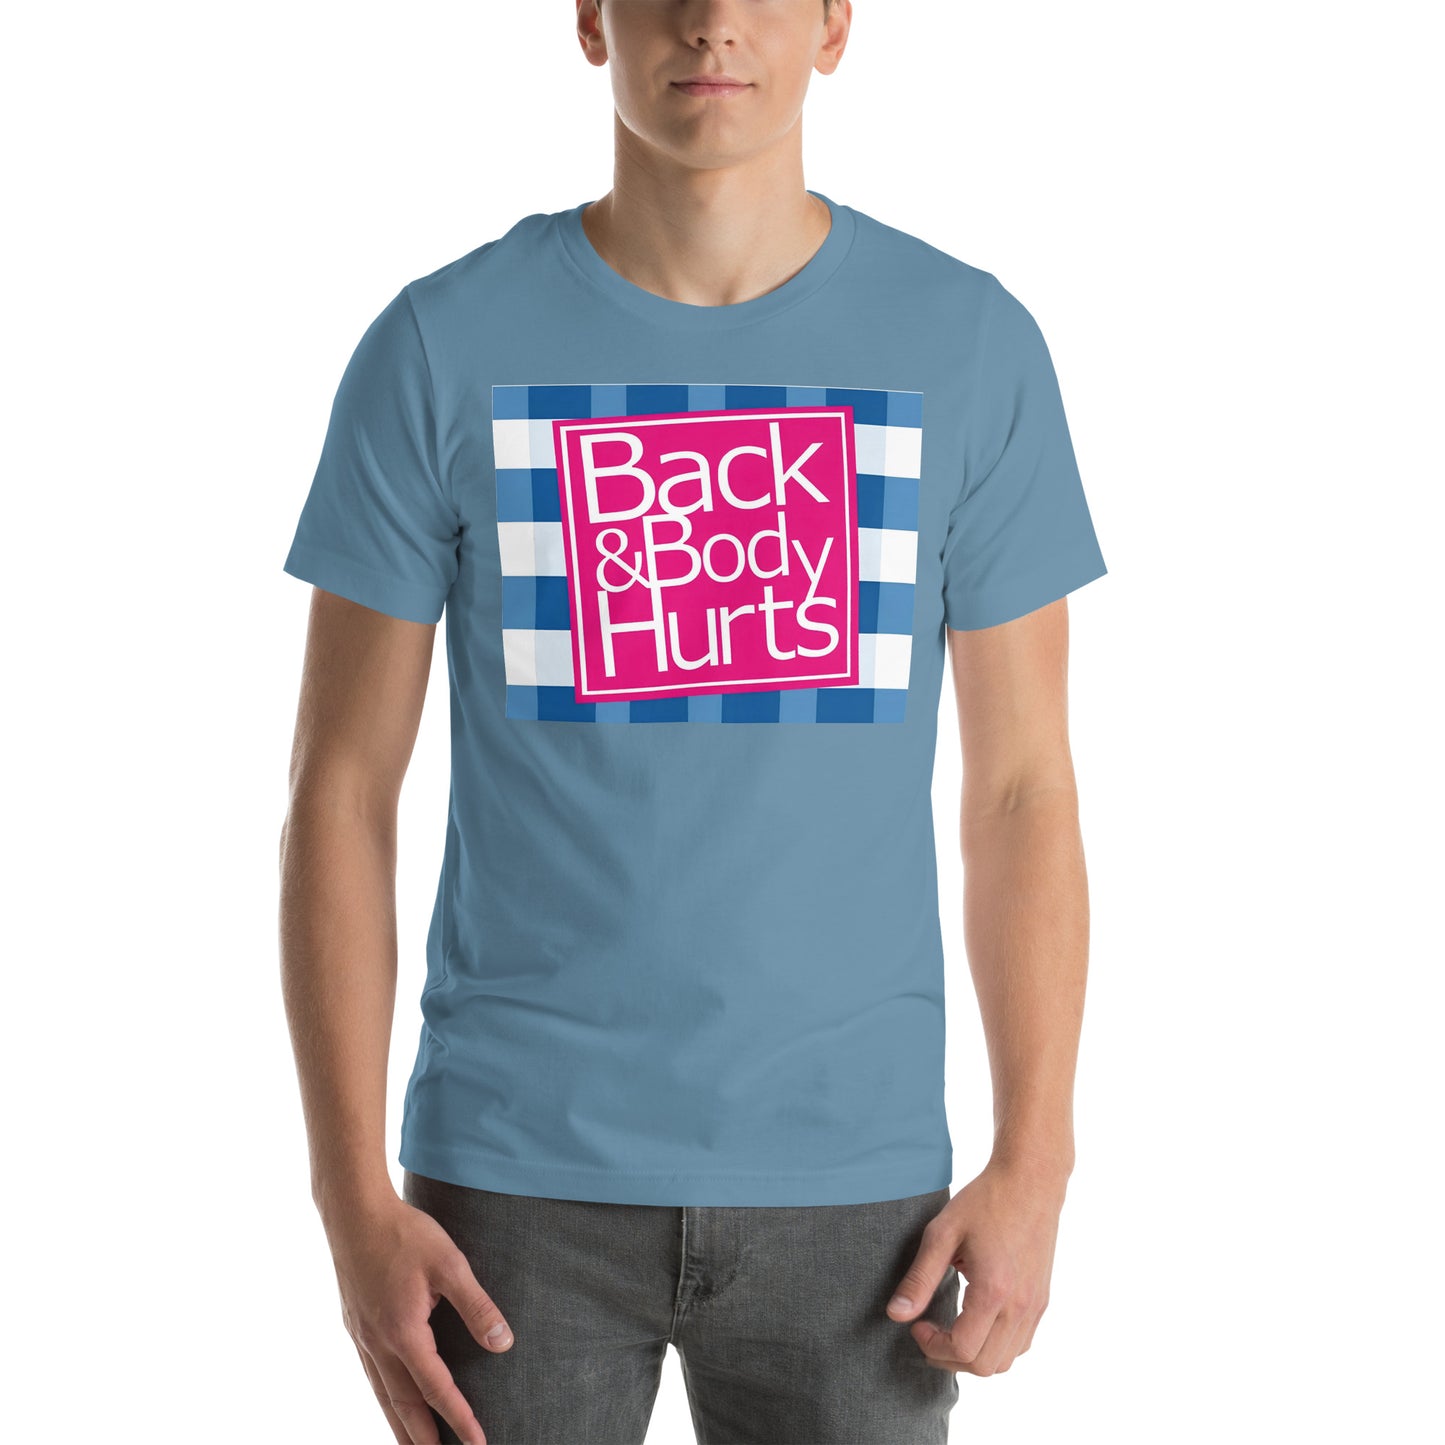 Back and body hurt t-shirt